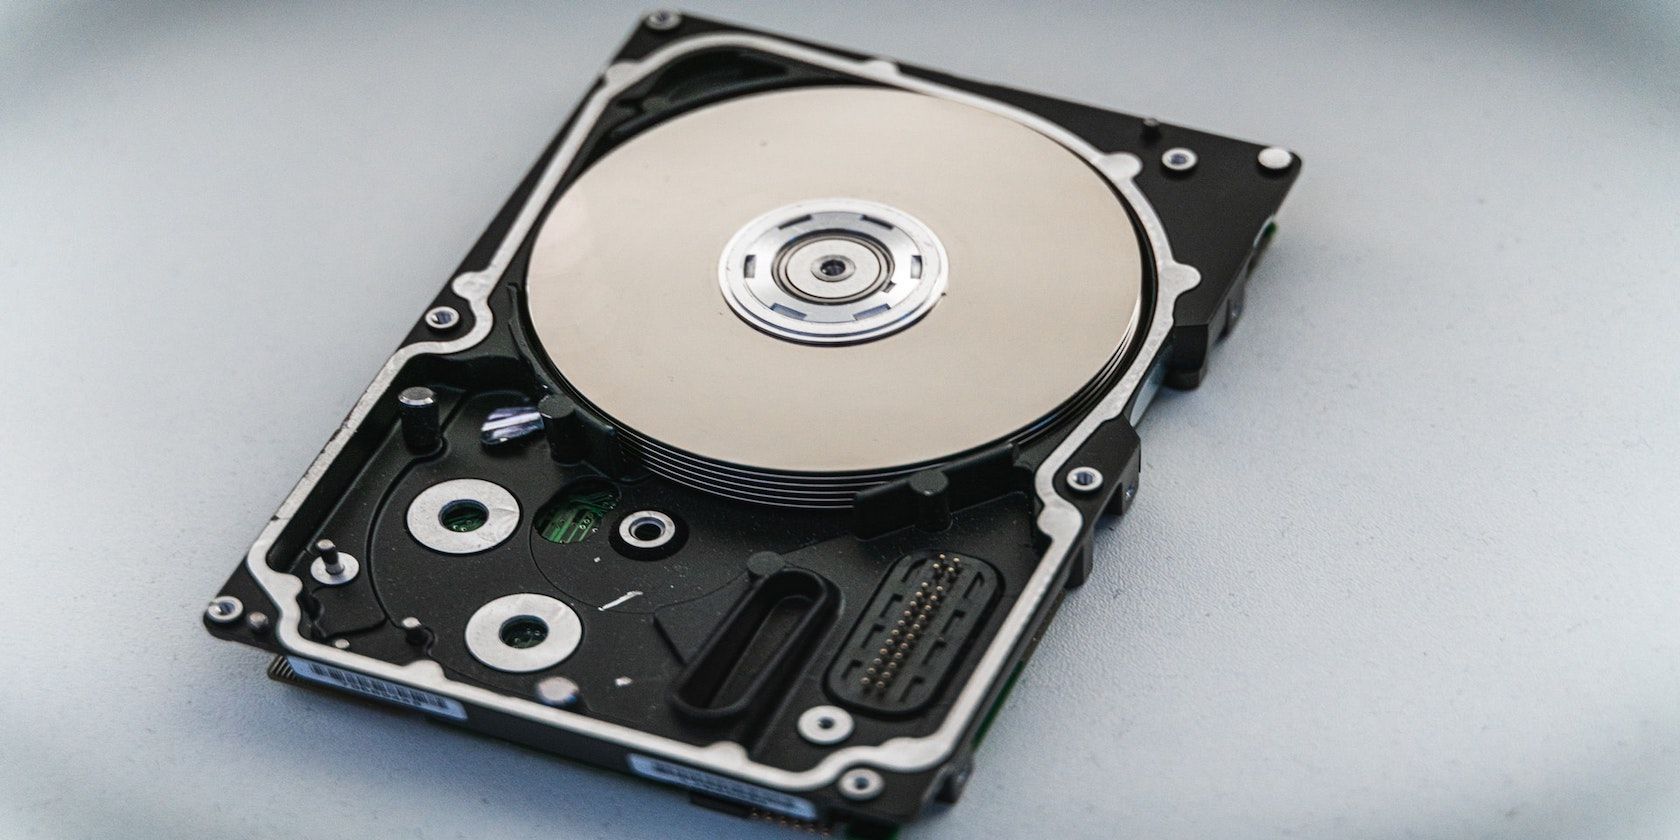 check disk usage on Linux using duf